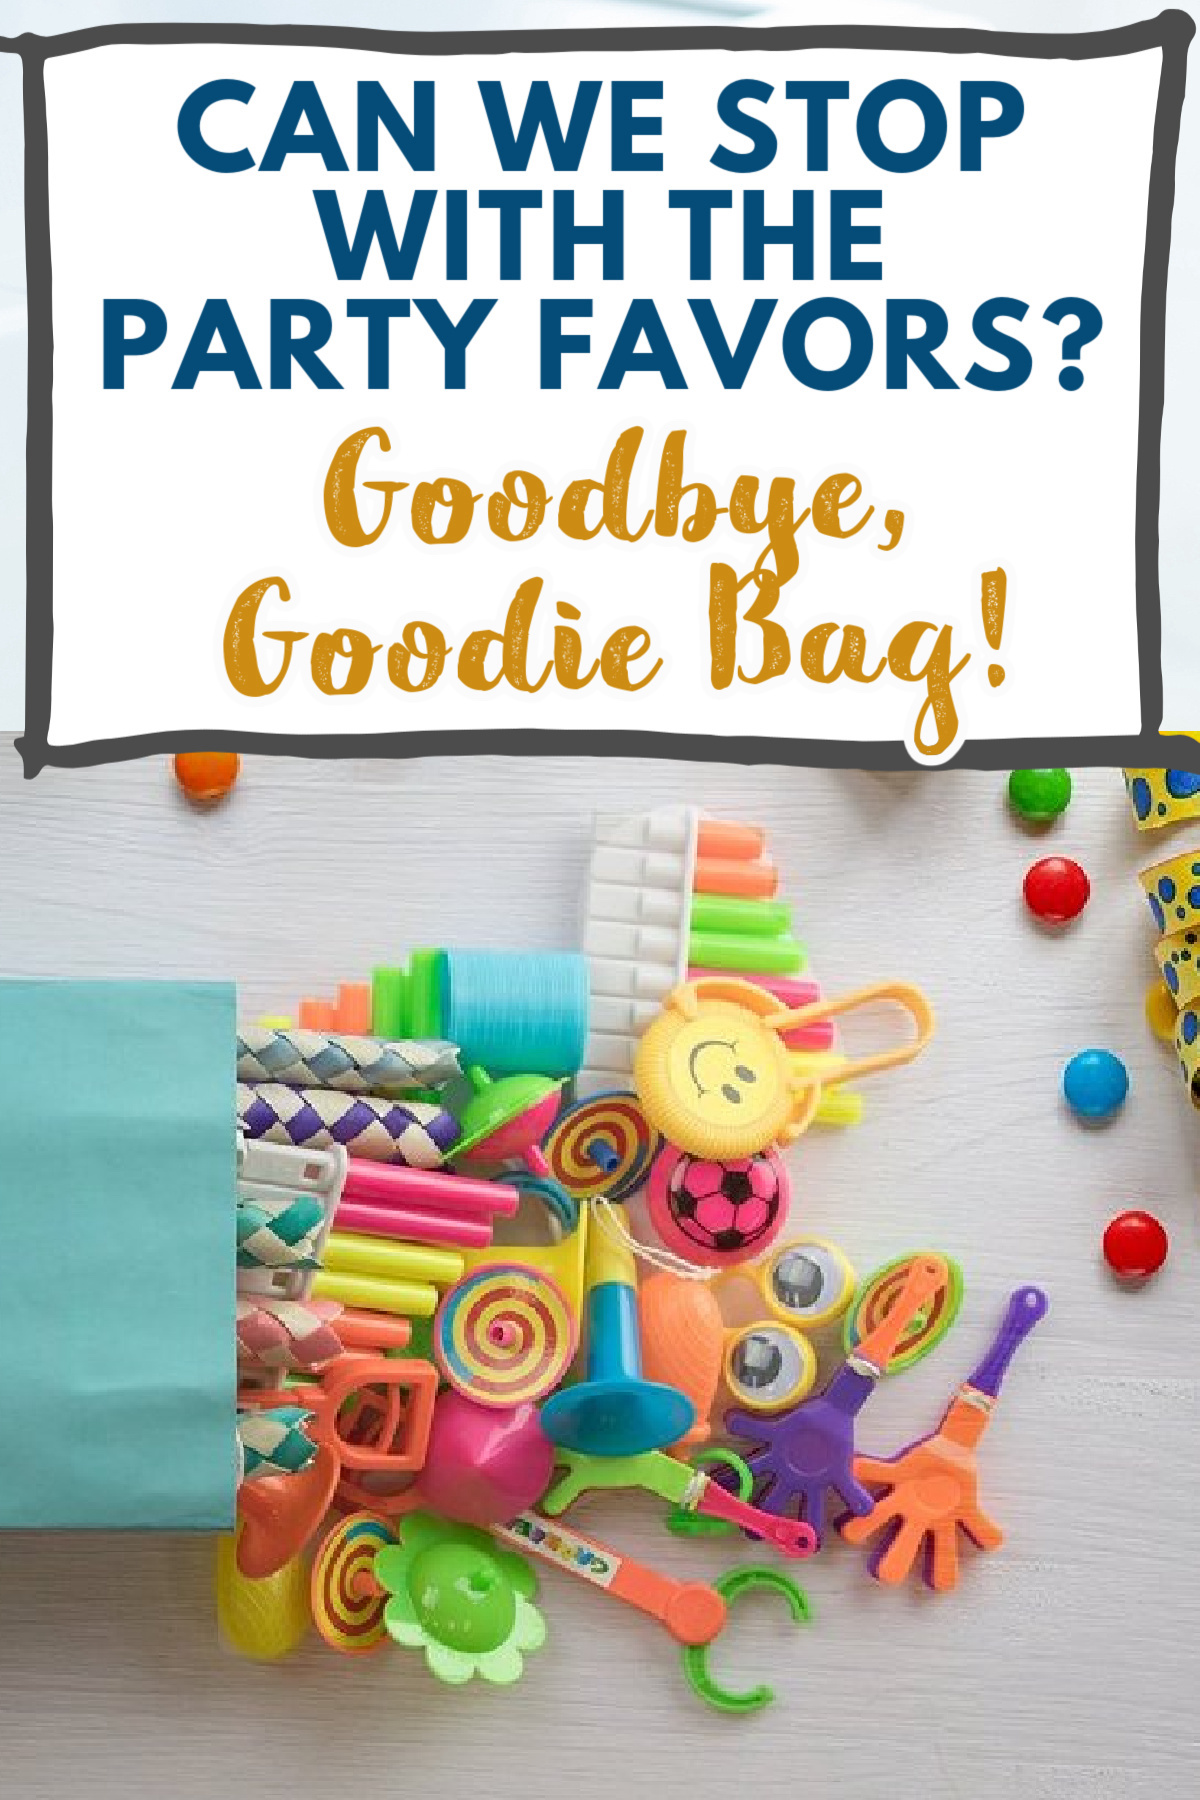 Moms Agree: It's Time to Say Goodbye to the Goodie Bag